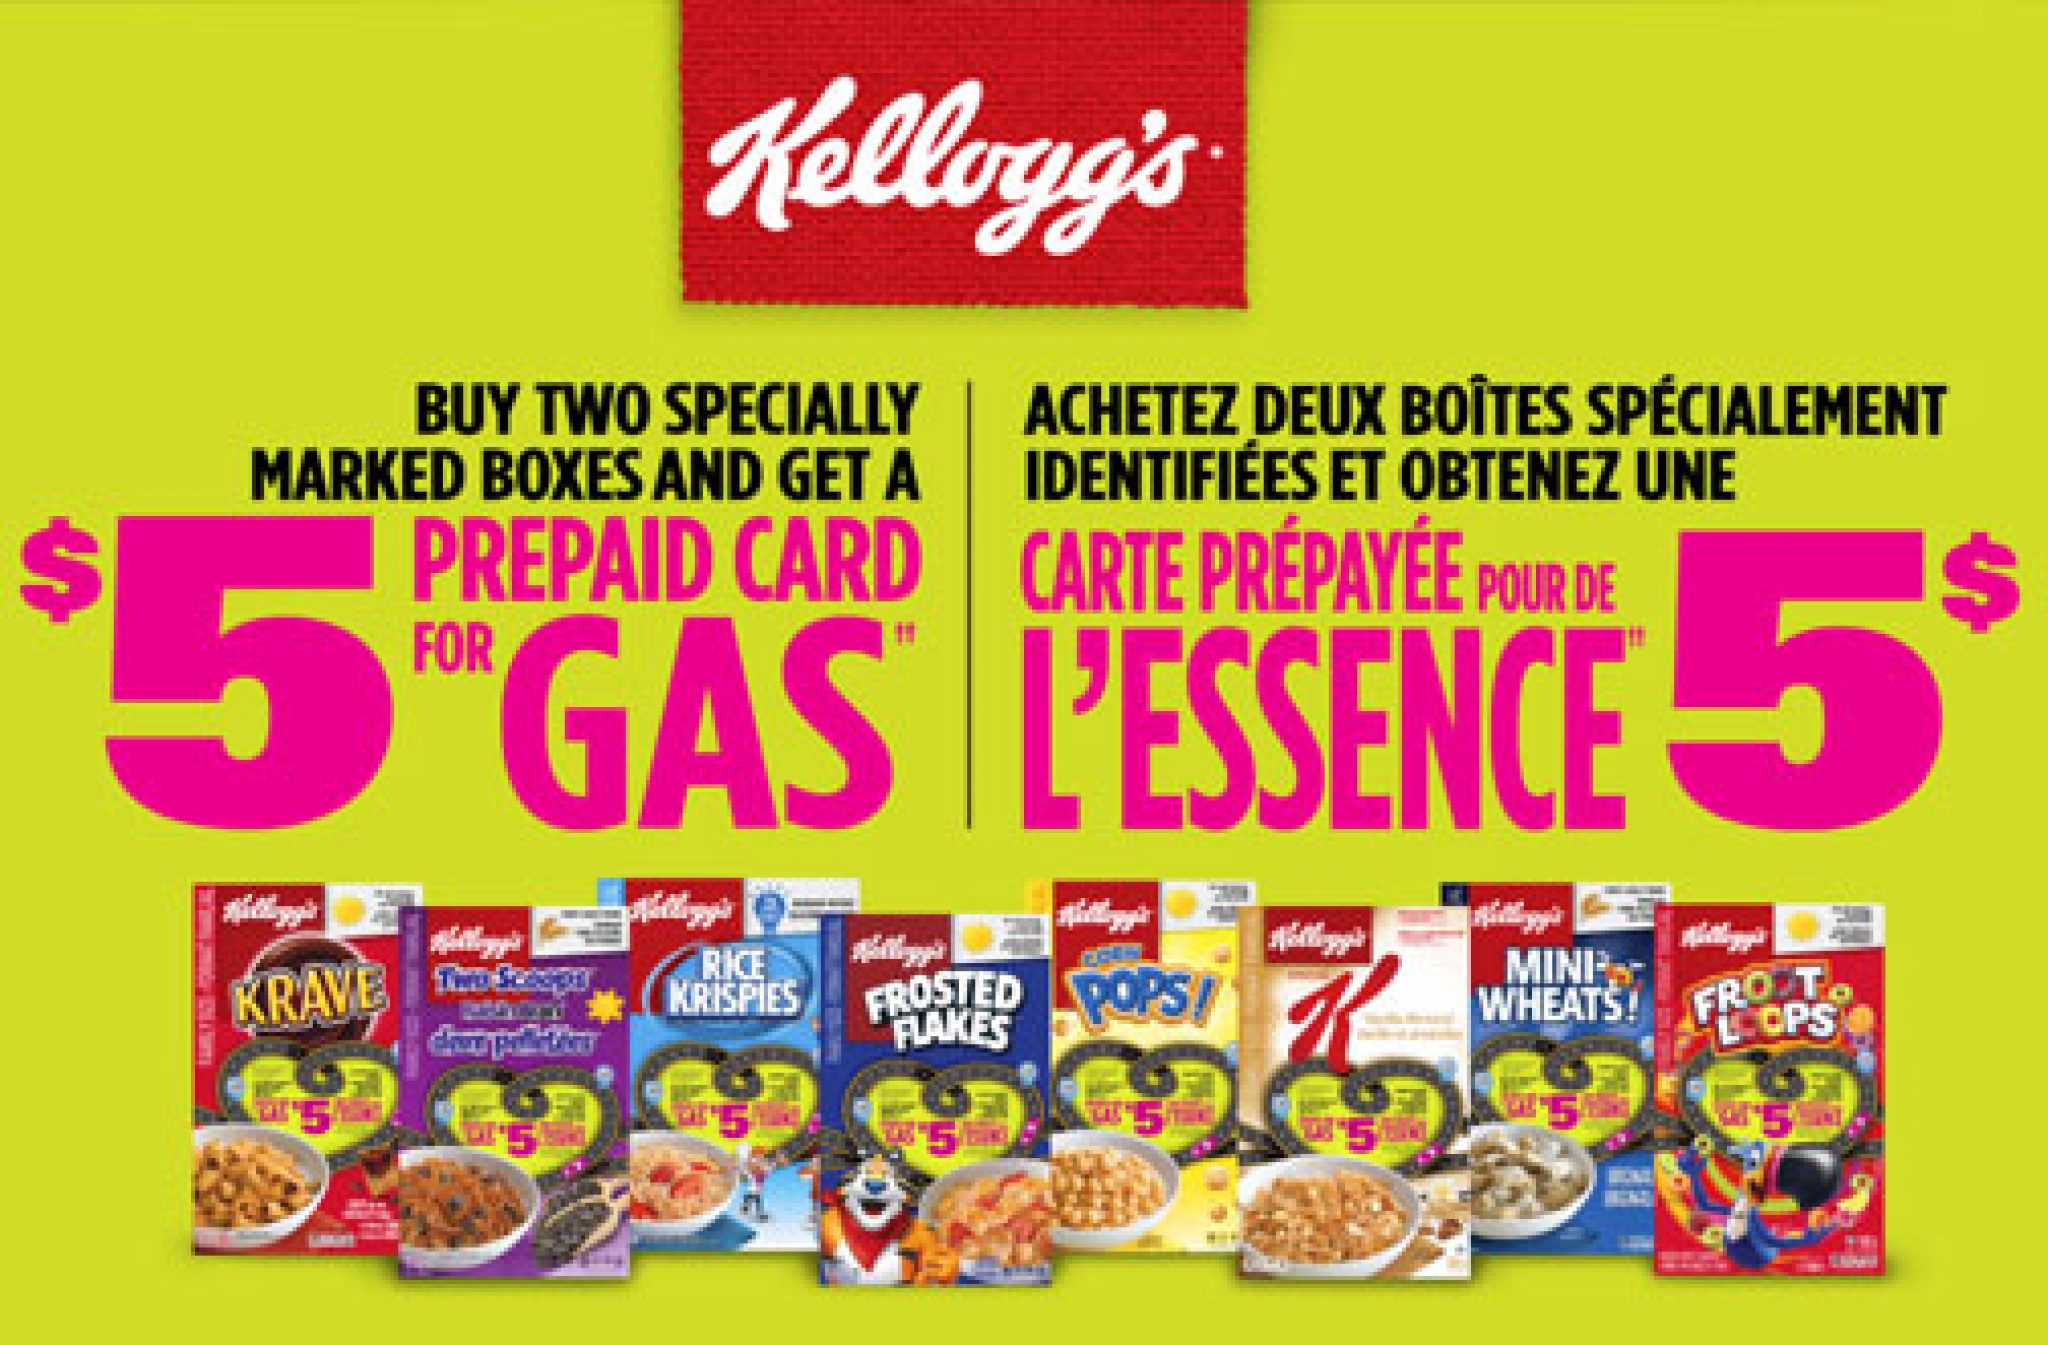 kellogg-s-gas-cash-promotion-deals-from-savealoonie